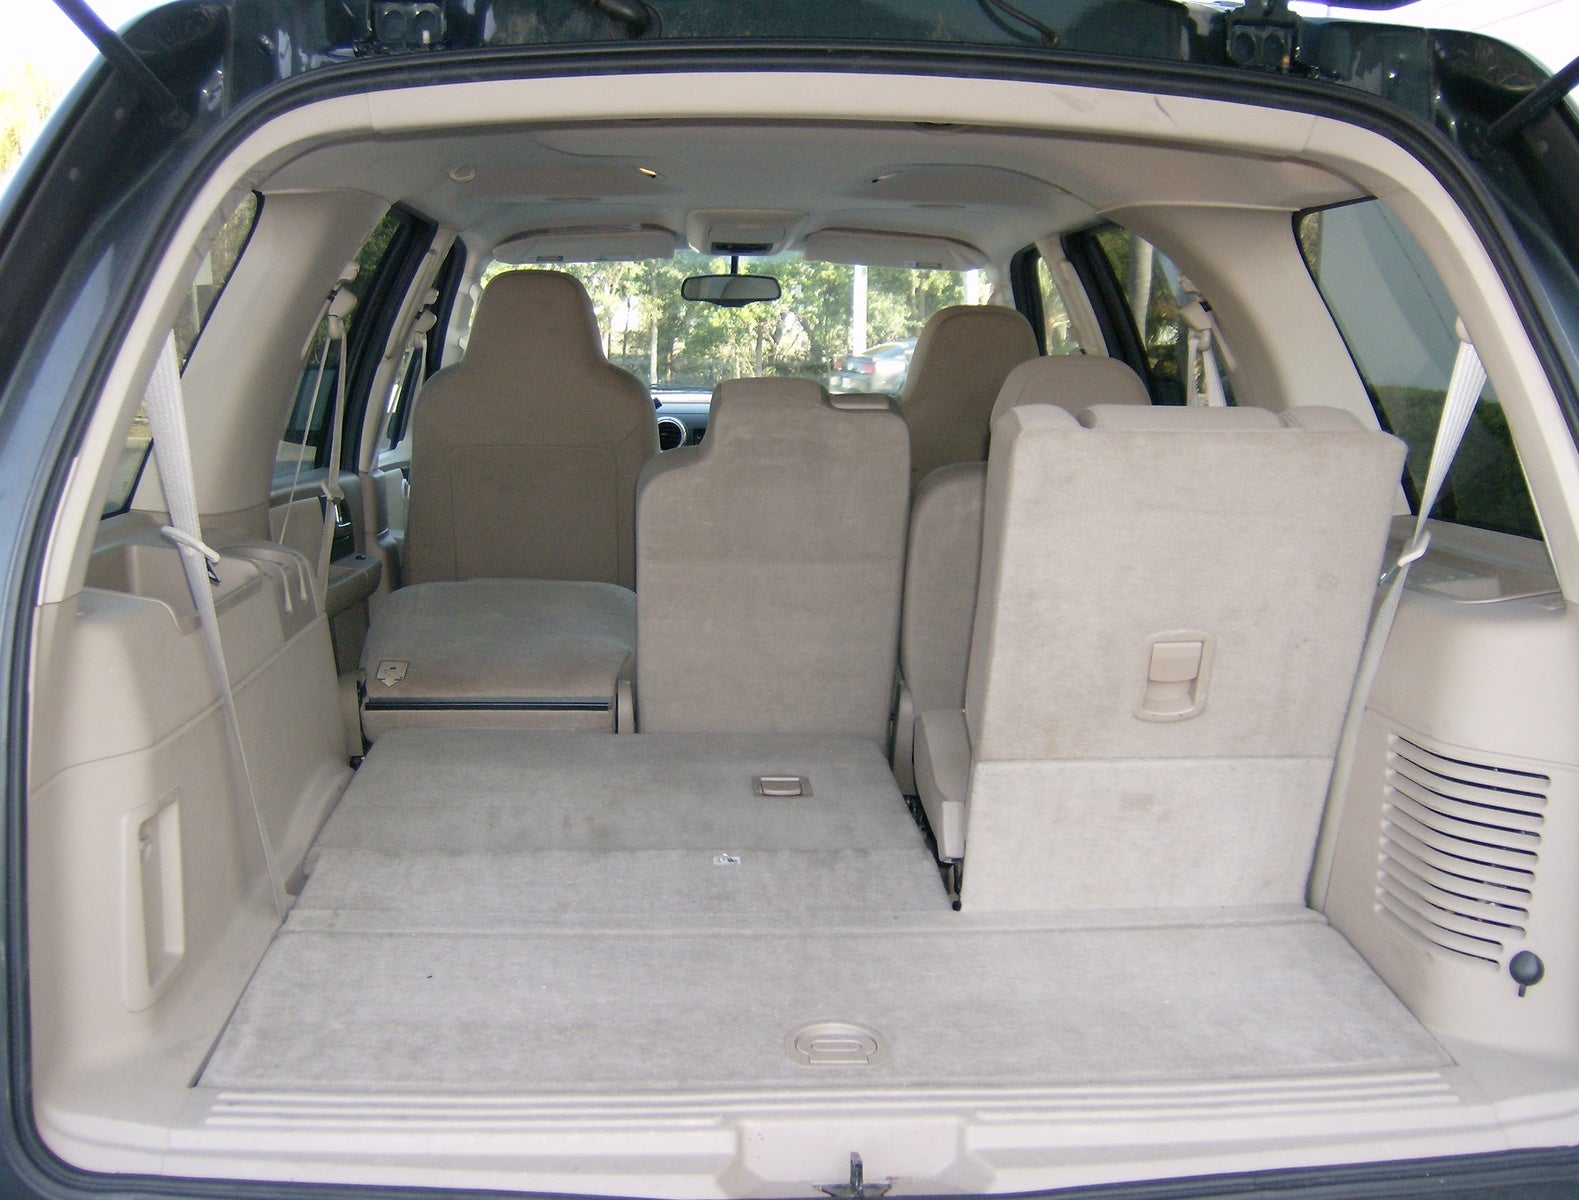 2003 Ford expedition interior dimensions #10